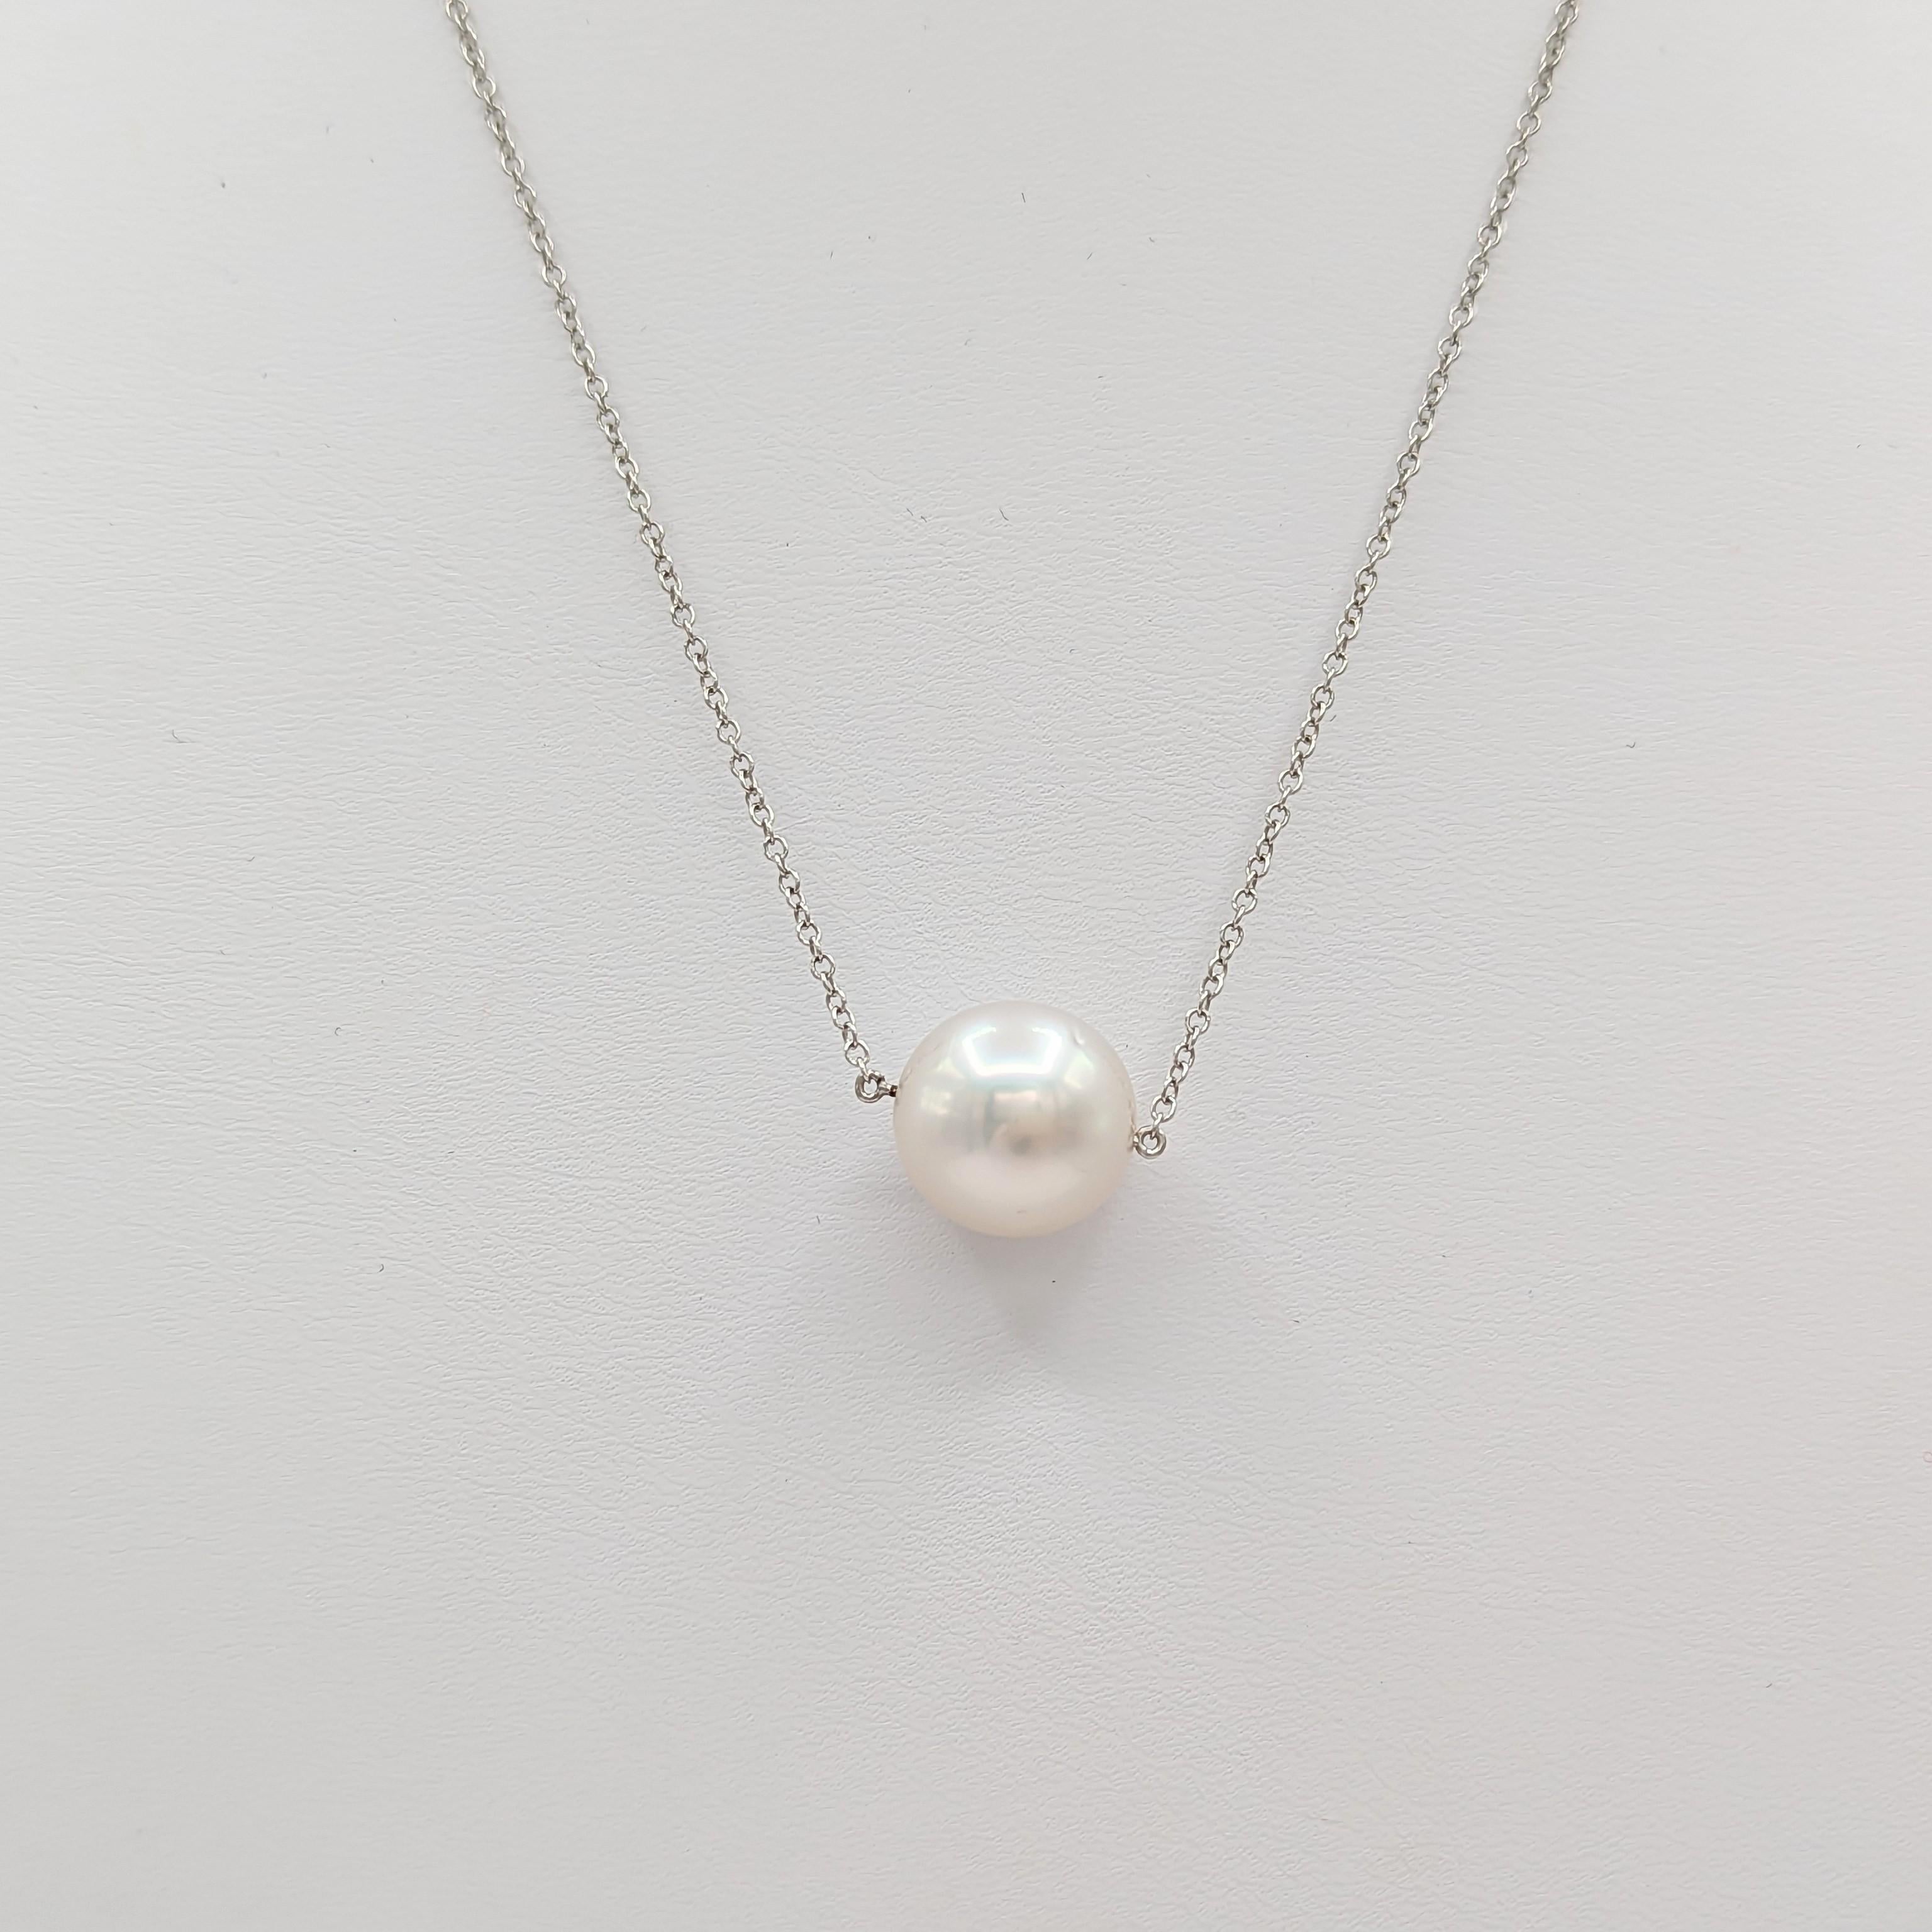 White South Sea Pearl Pendant Necklace in 18K White Gold For Sale 1